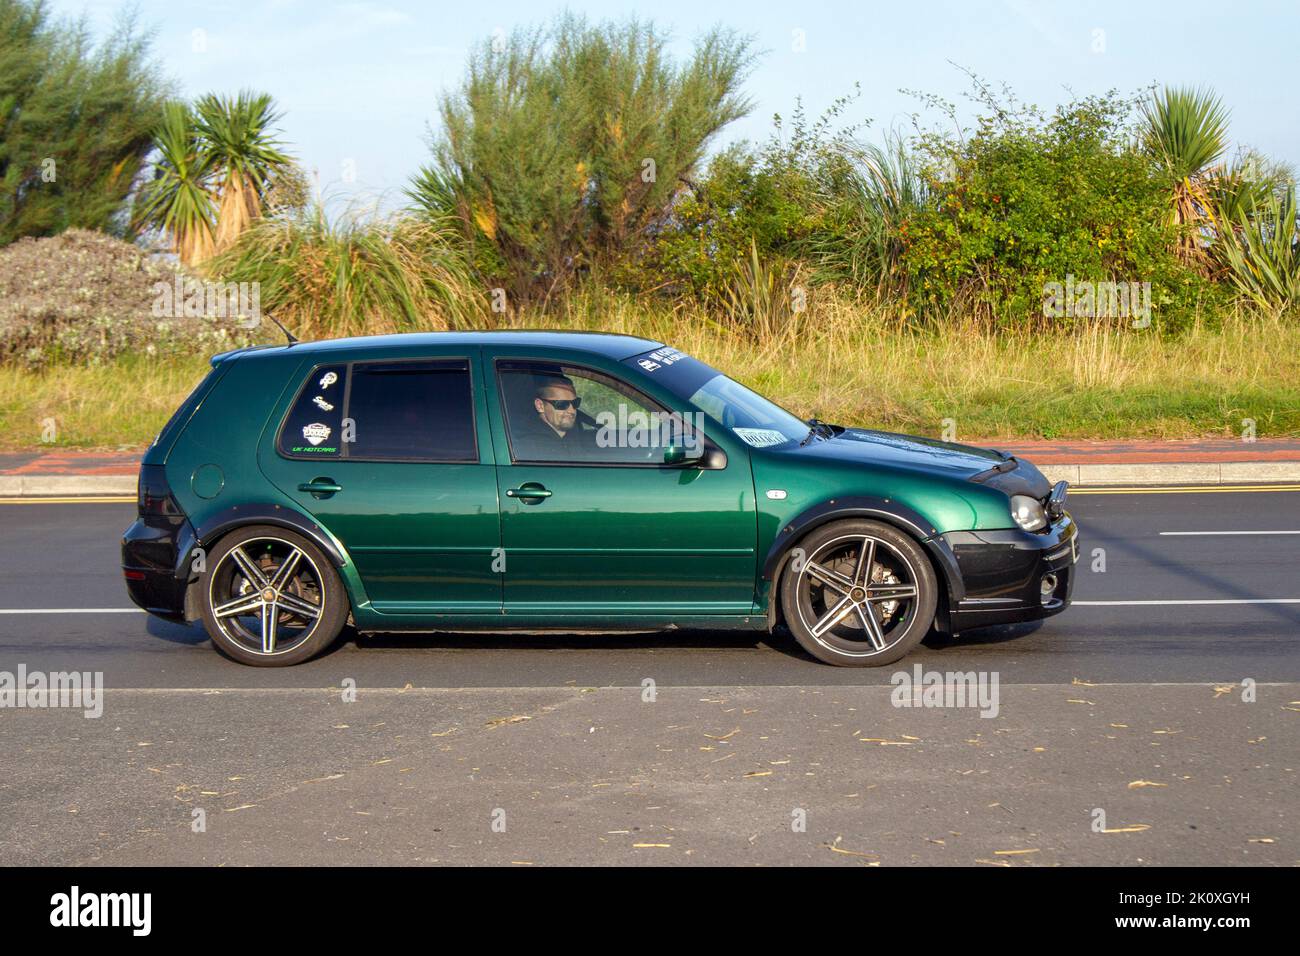 2002 Green VW VOLKSWAGEN GOLF GT TDI (130BHP) 1896cc 6-speed manual; at the Southport Classic car and Speed event, UK Stock Photo